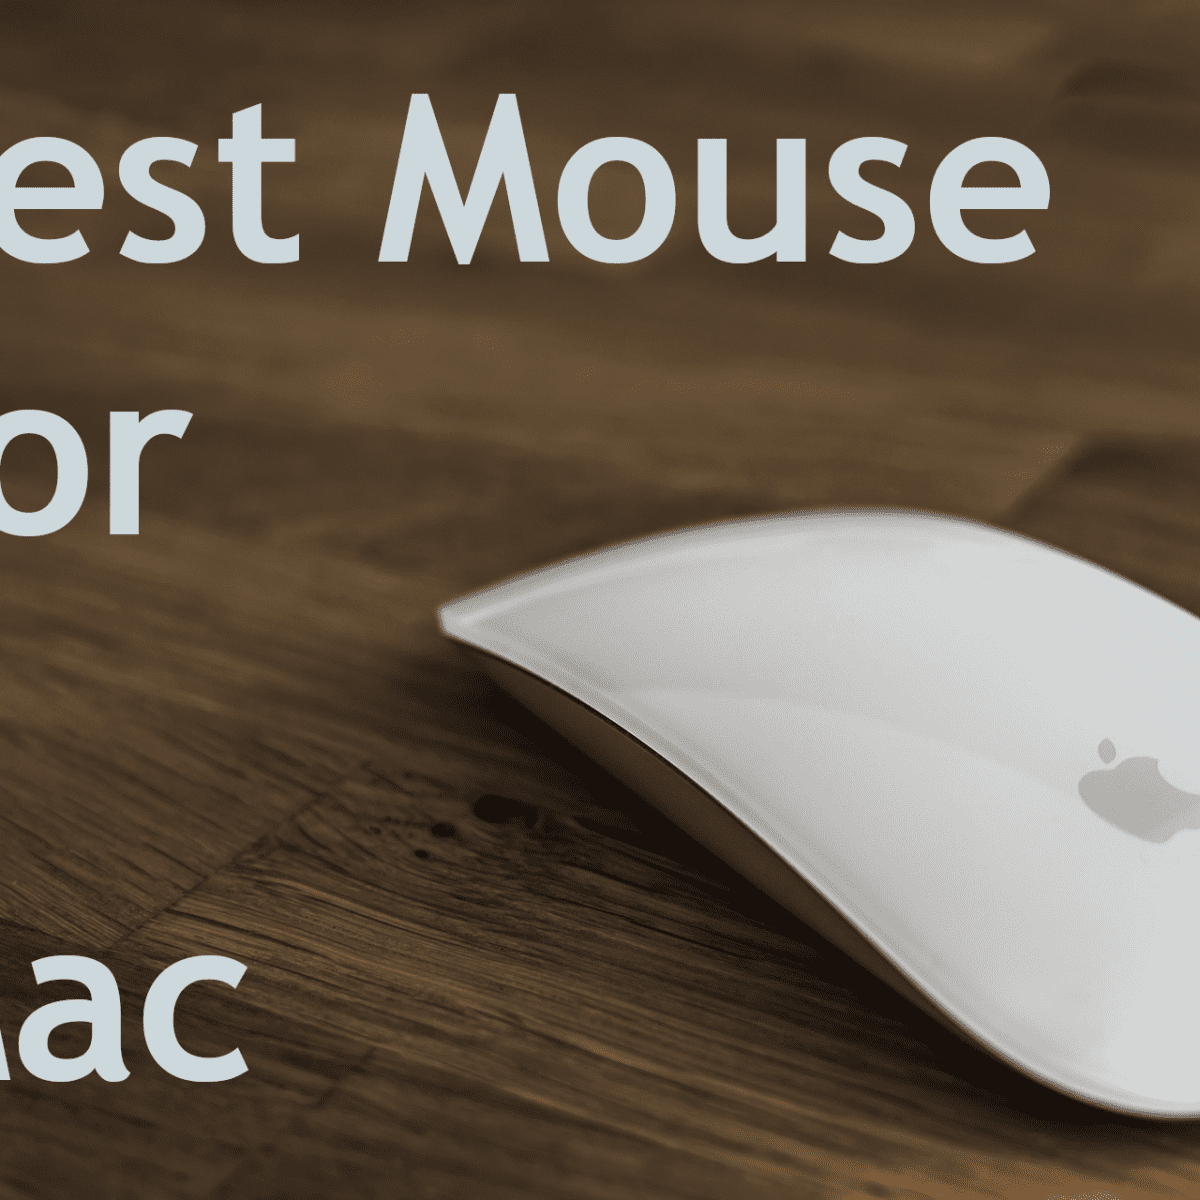 bluetooth mouse that works with mac powerbook pro